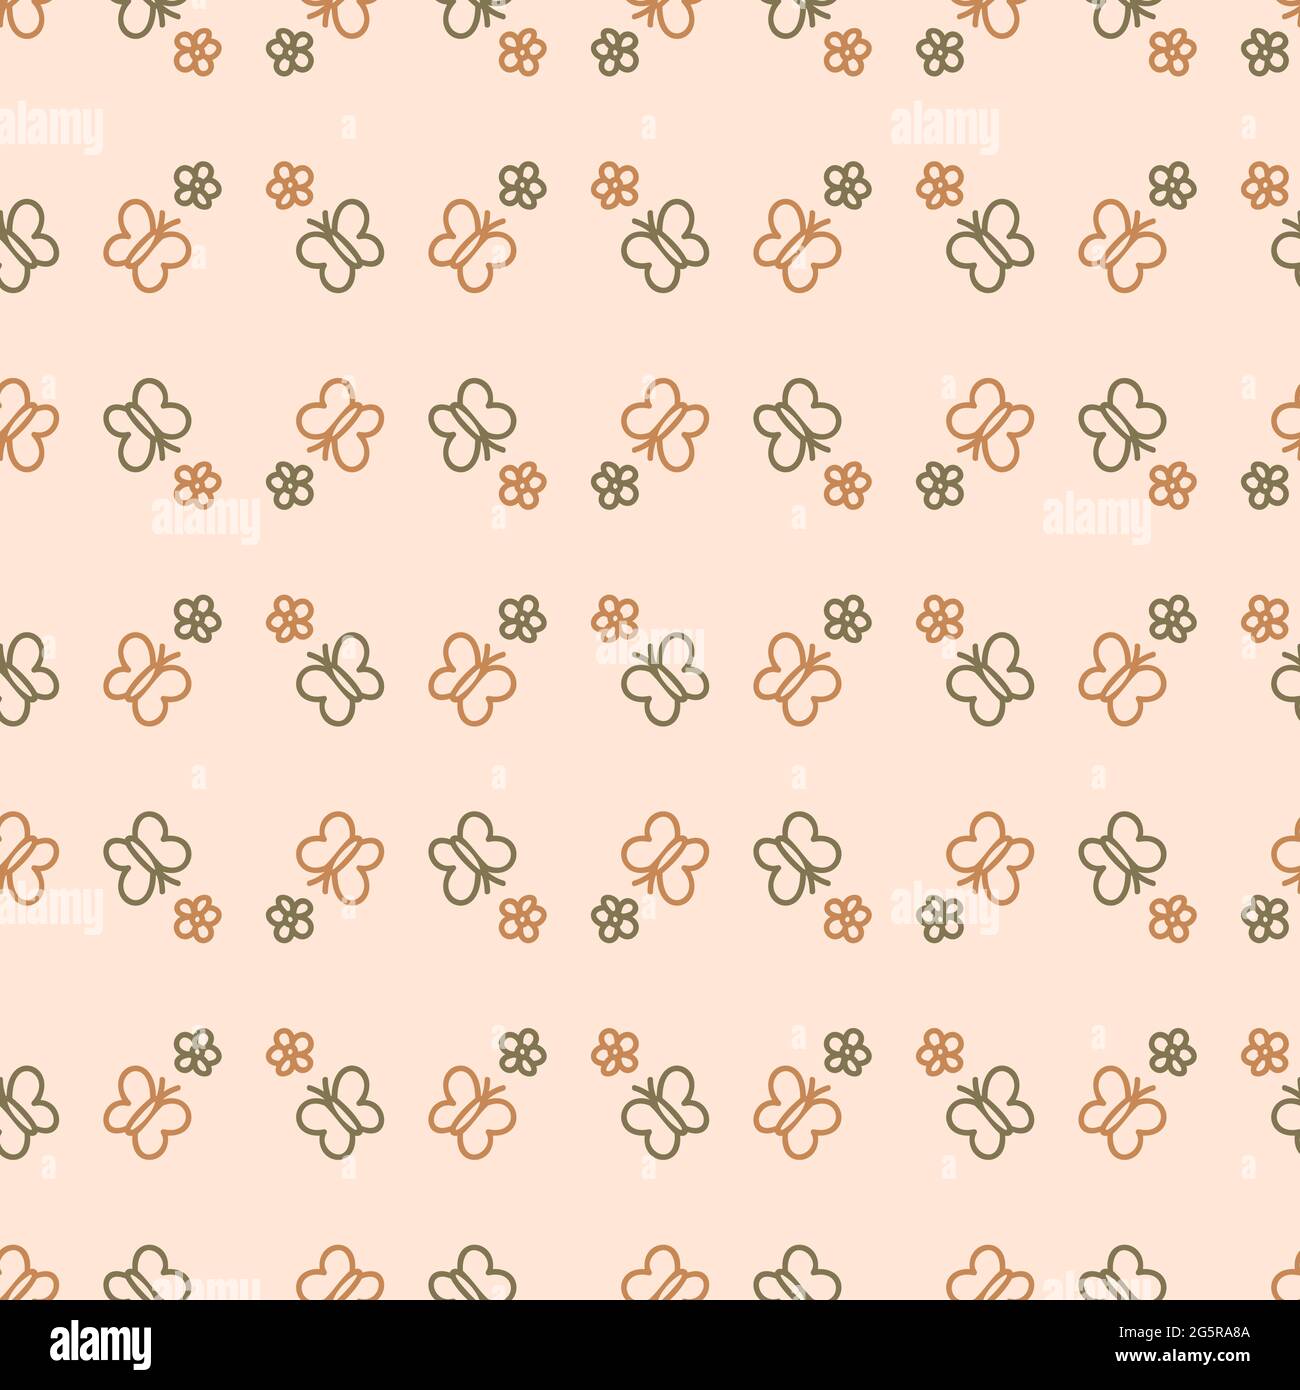 Seamless background butterfly gender neutral pattern. Whimsical